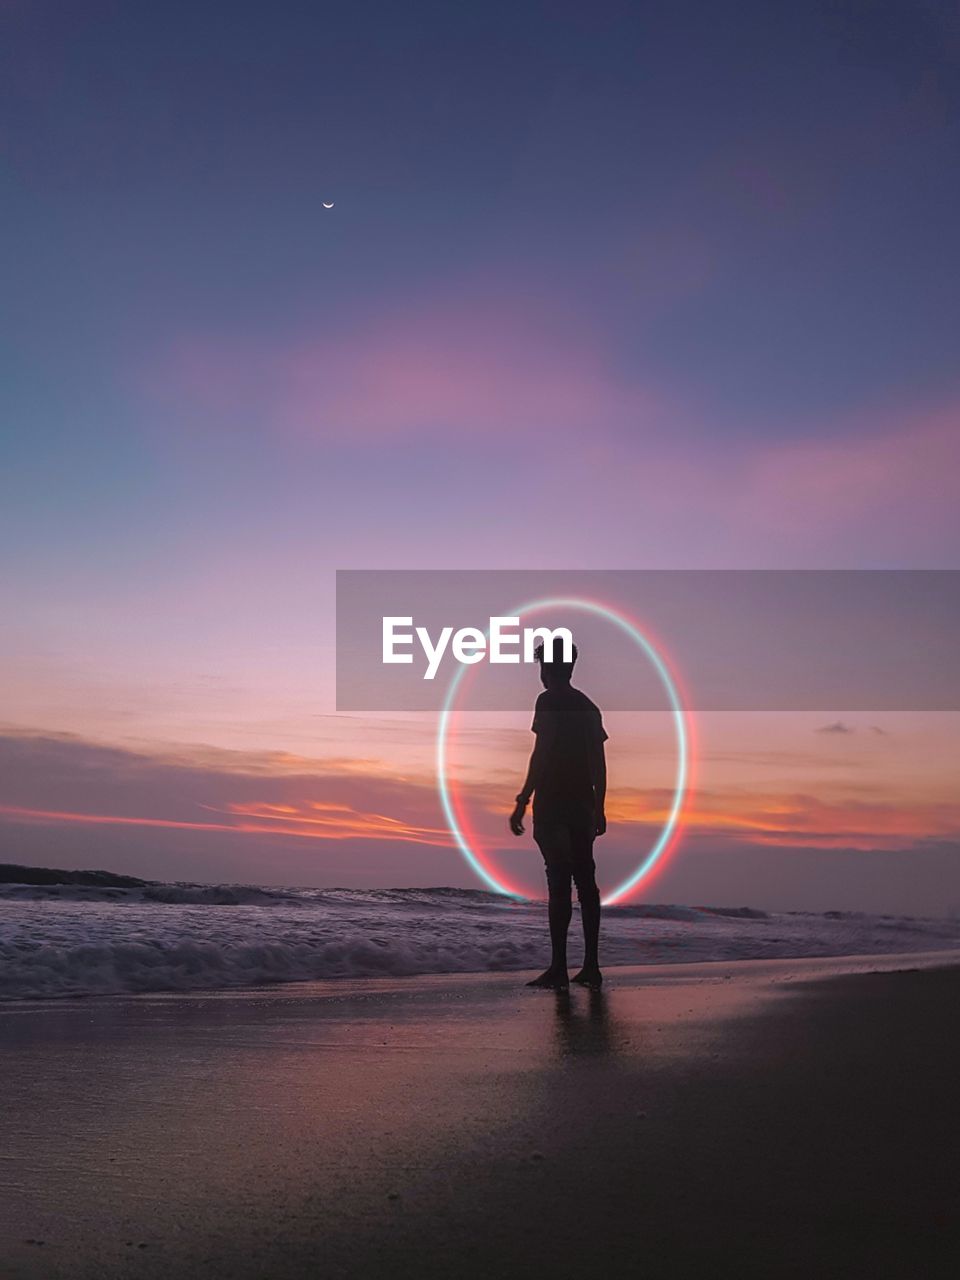 Digital composite image of man standing against circle on beach during sunset